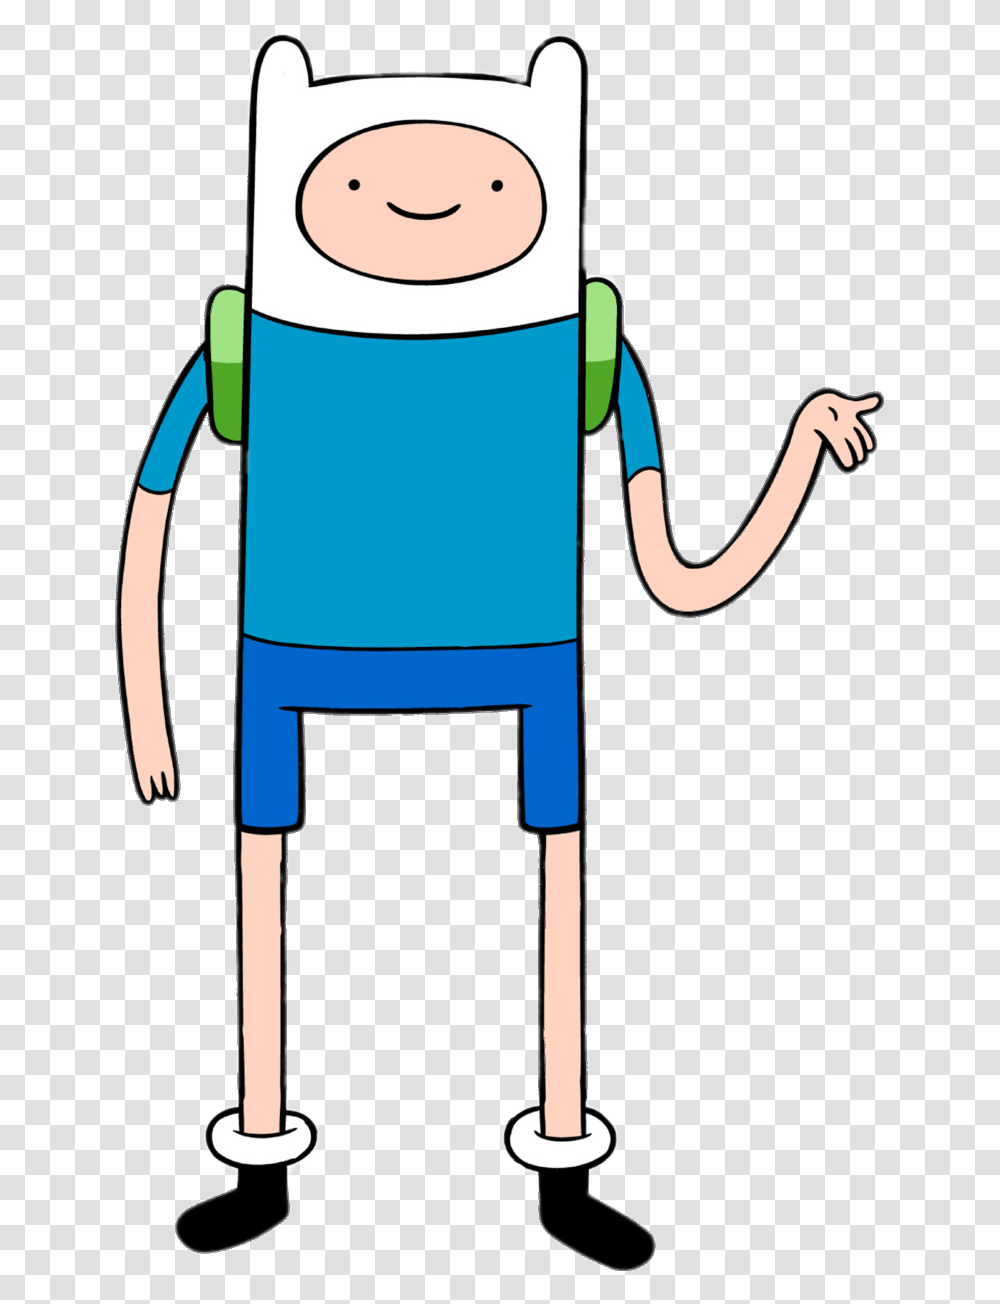 Adventure Time Image Finn Adventure Time, Chair, Furniture, Gas Pump, Table Transparent Png